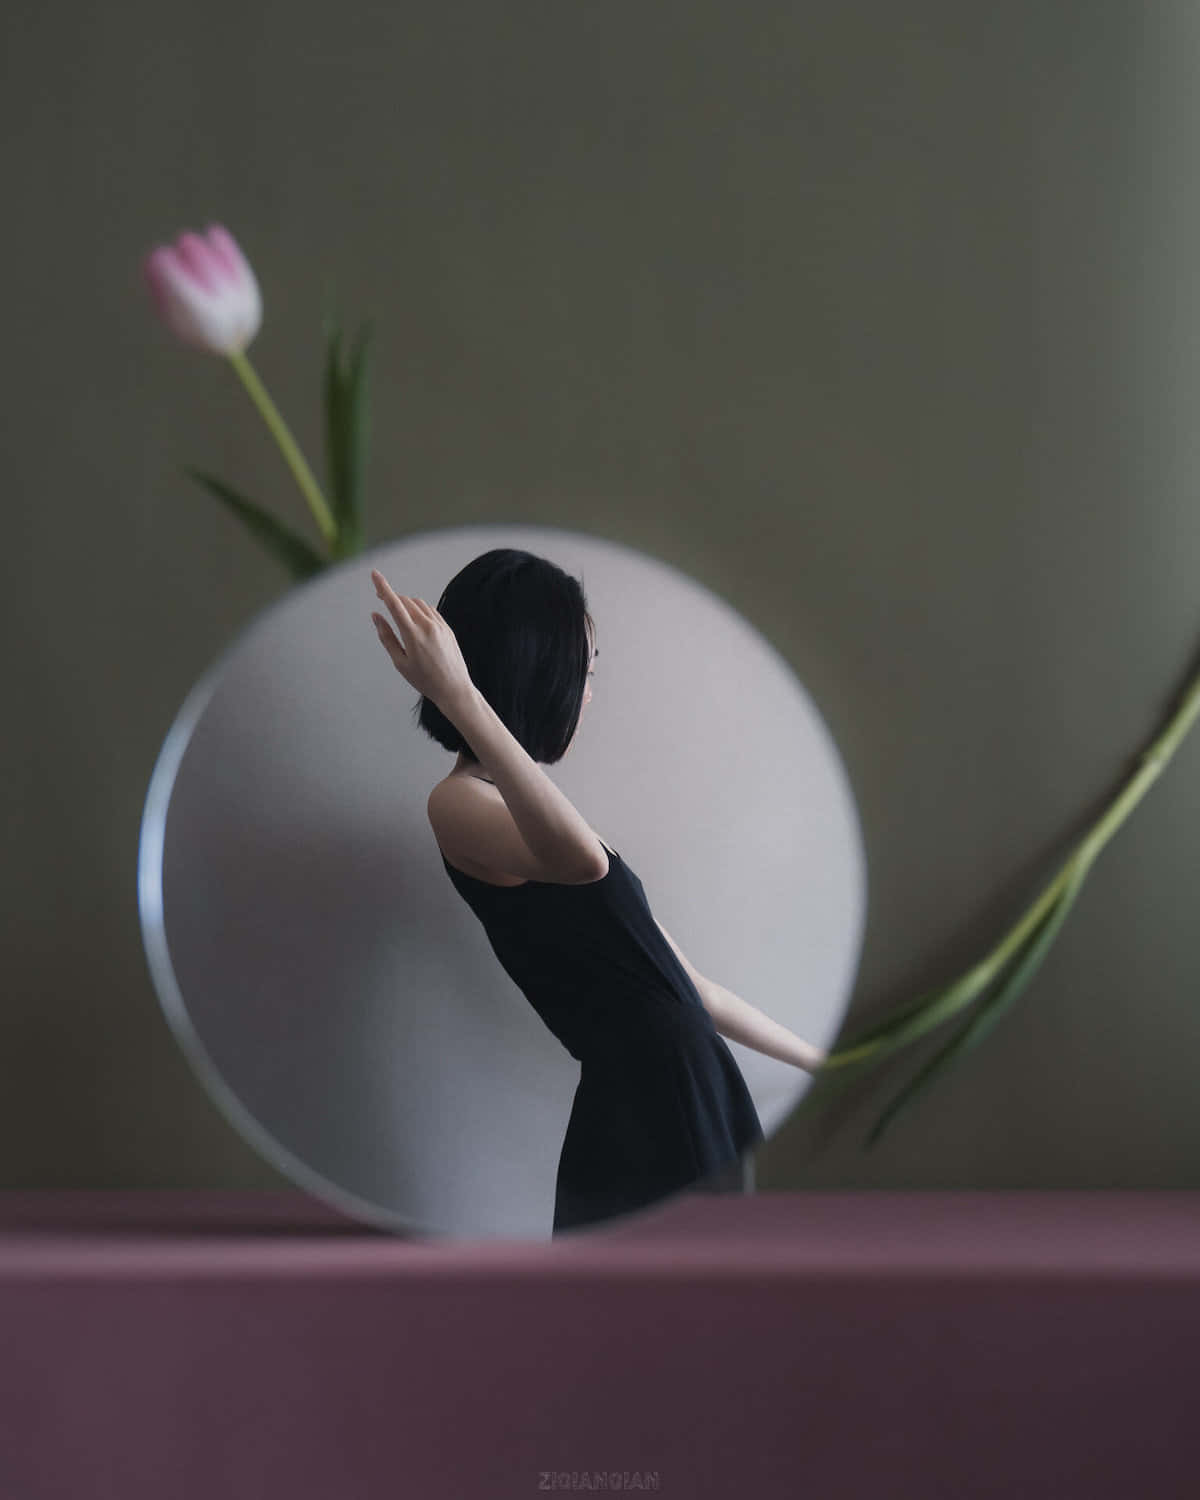 Woman Reflection In Mirror With Tulip Flower Picture